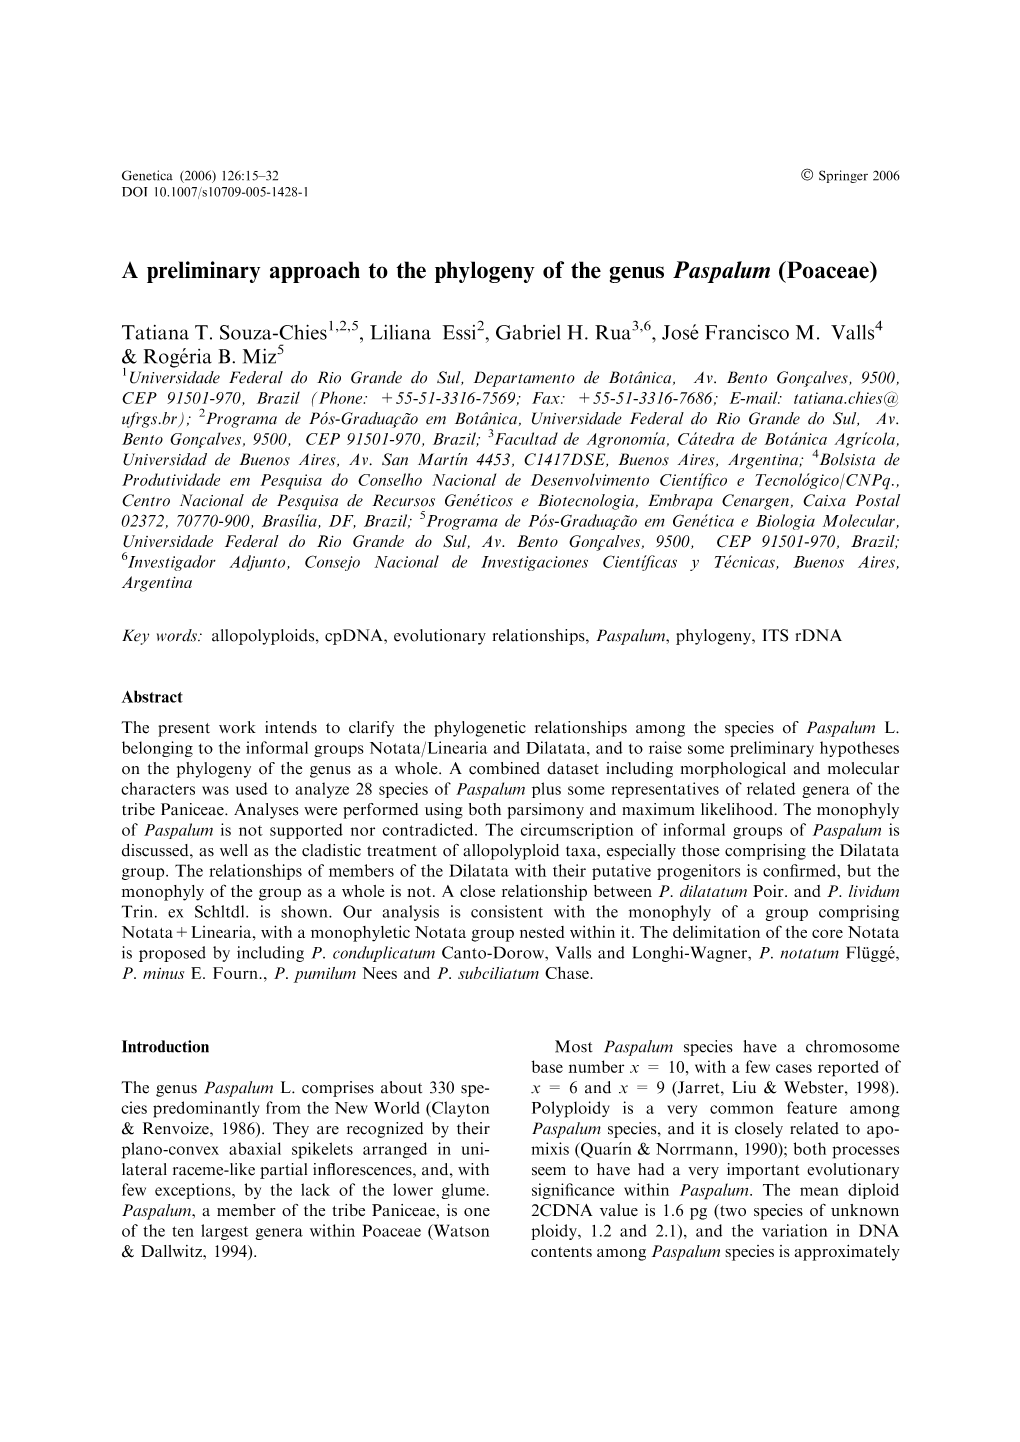 A Preliminary Approach to the Phylogeny of the Genus Paspalum (Poaceae)